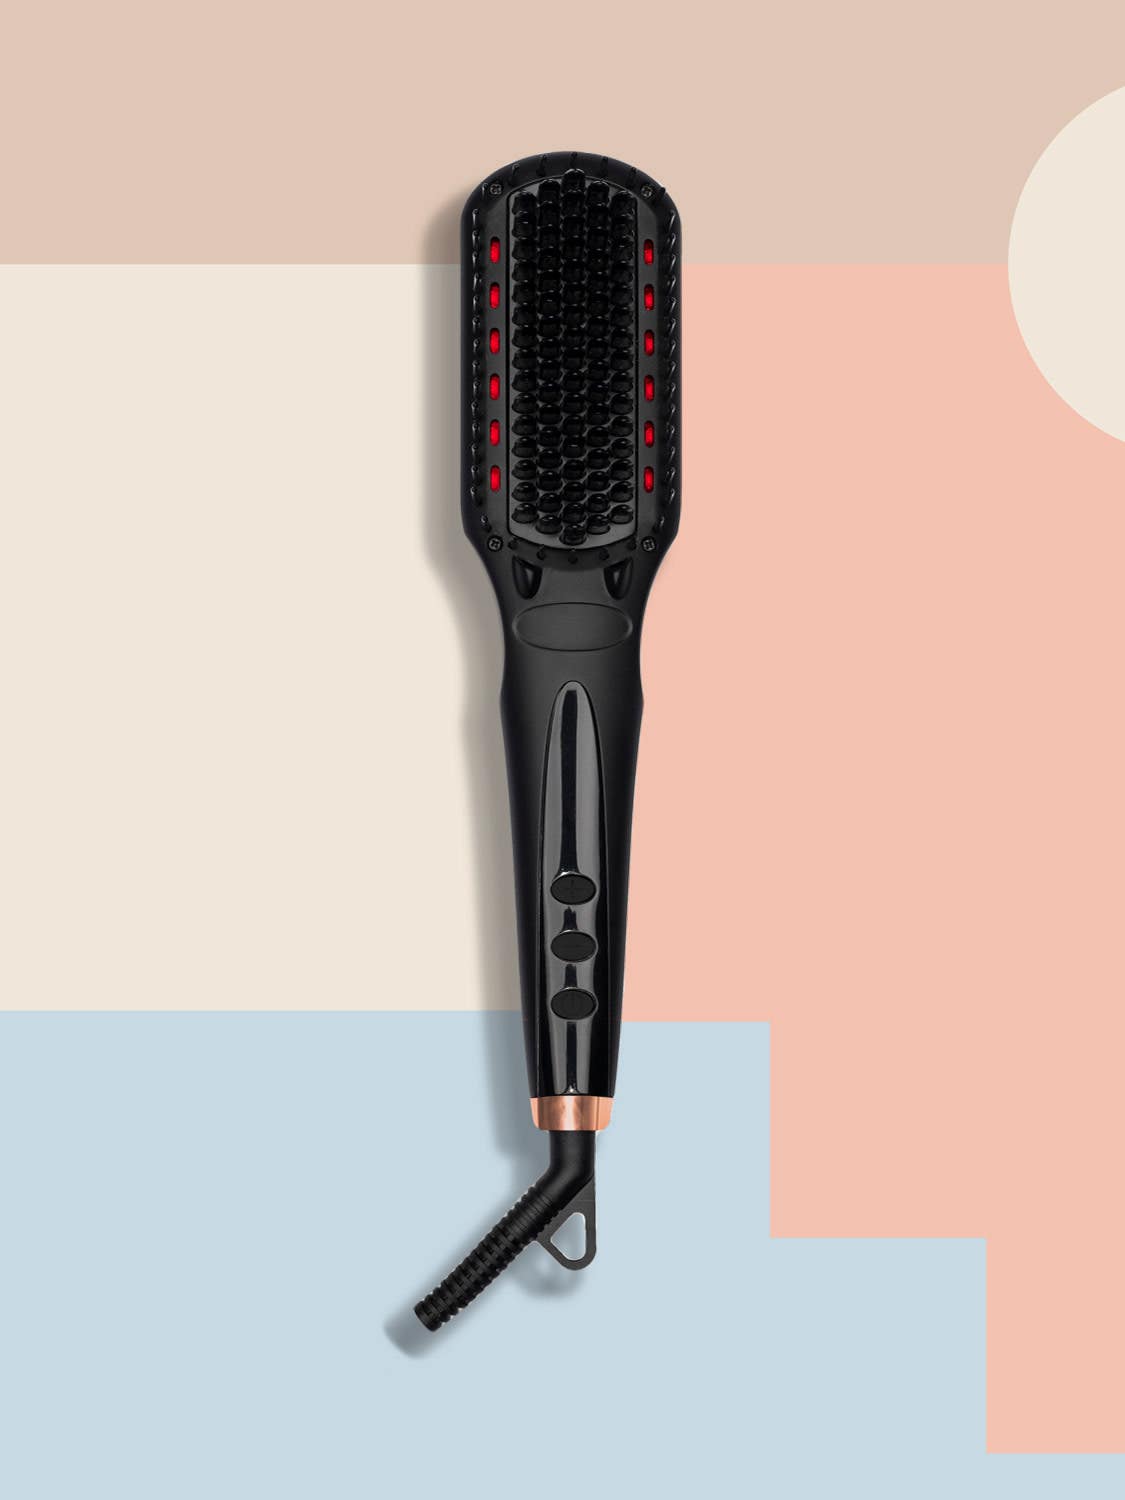 Infrared Hair Straighteners Promise Silkier Locks—But Do They Work?